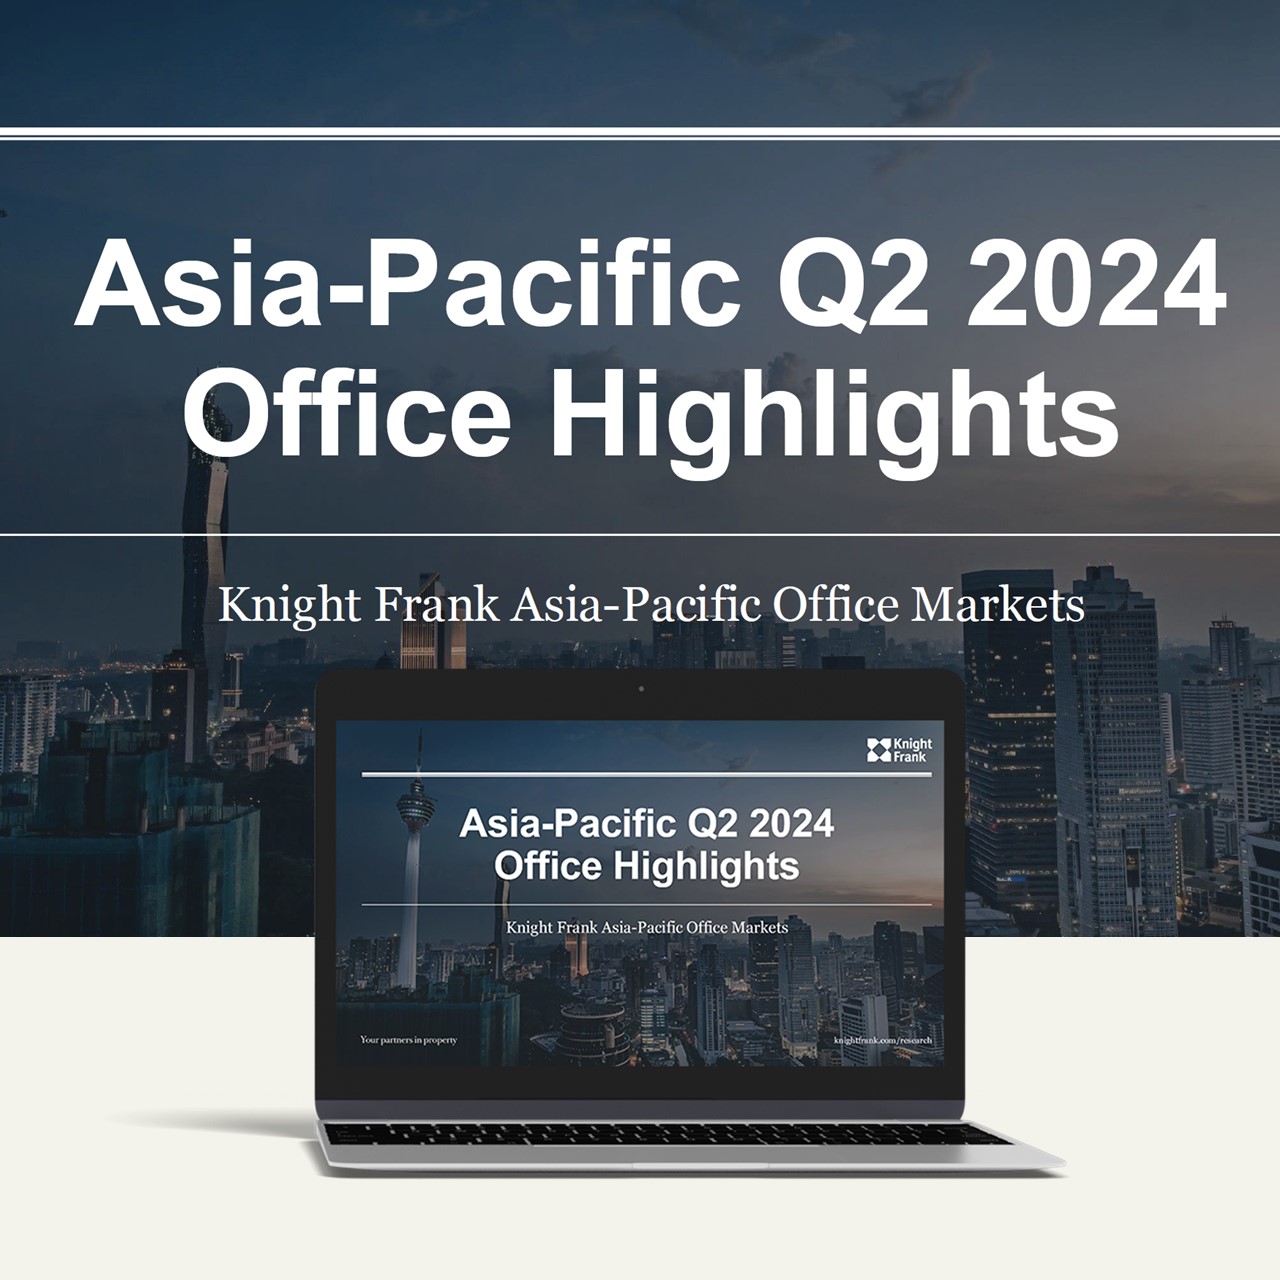 Knight Frank Asia-Pacific Q2 2024 Office Highlights